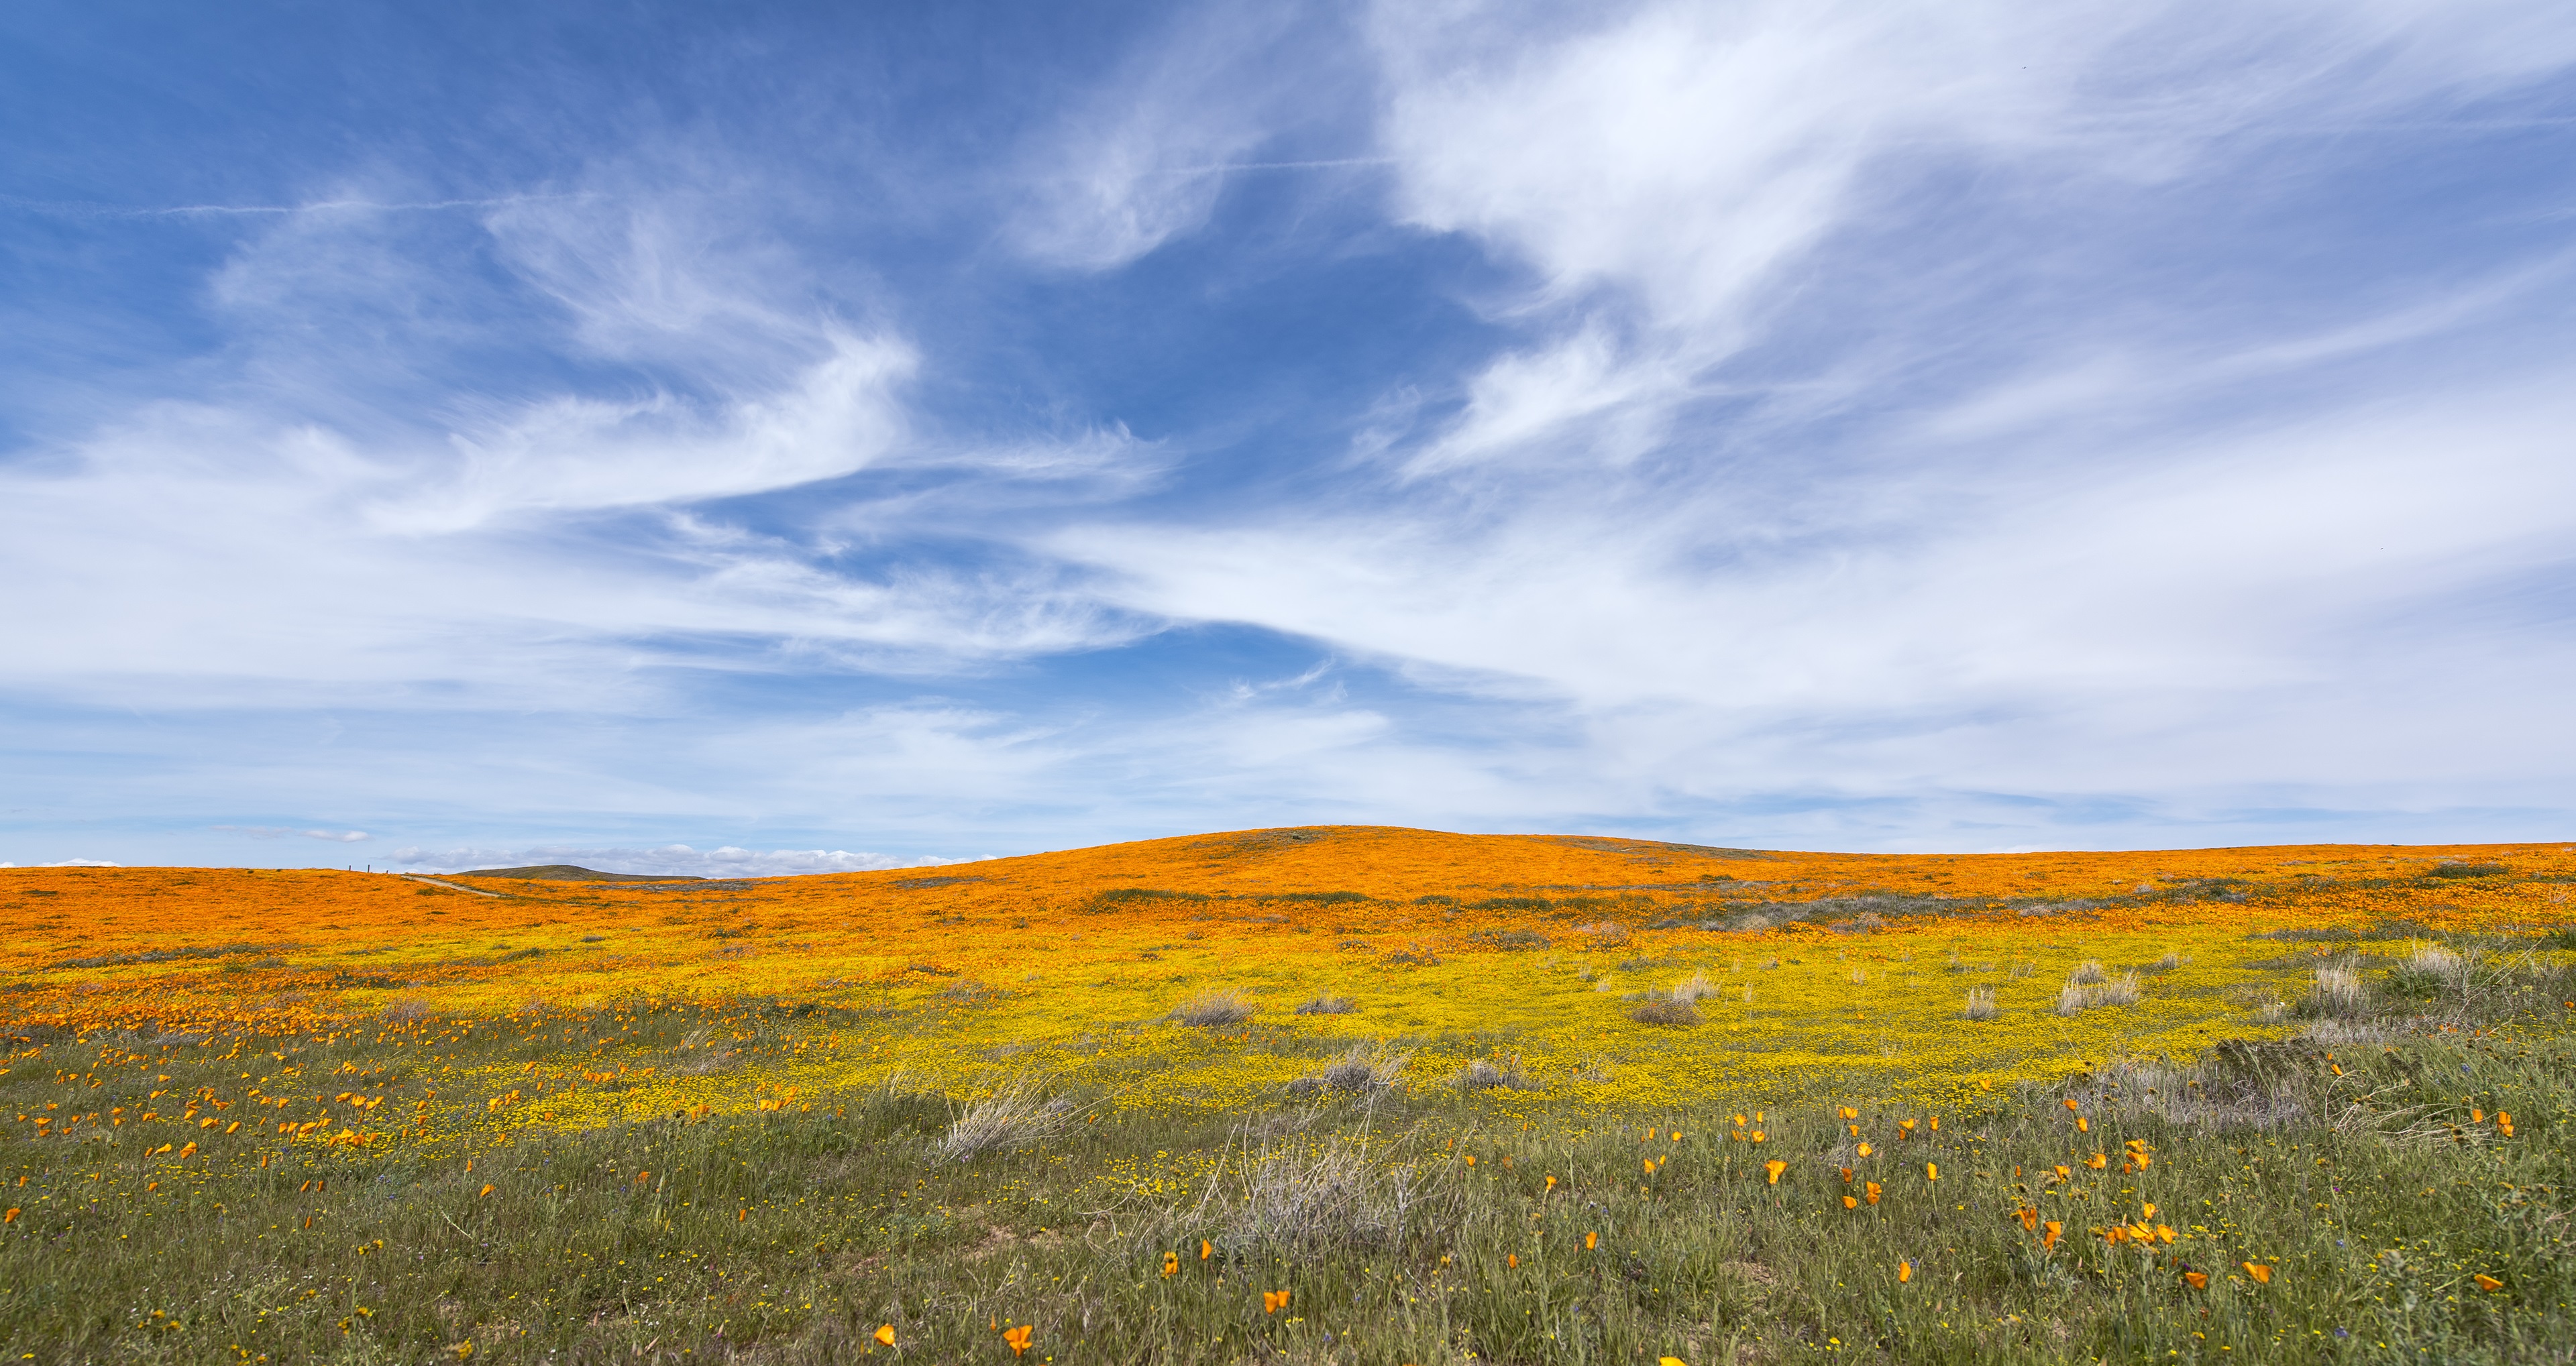 Landscape of yellow poppies